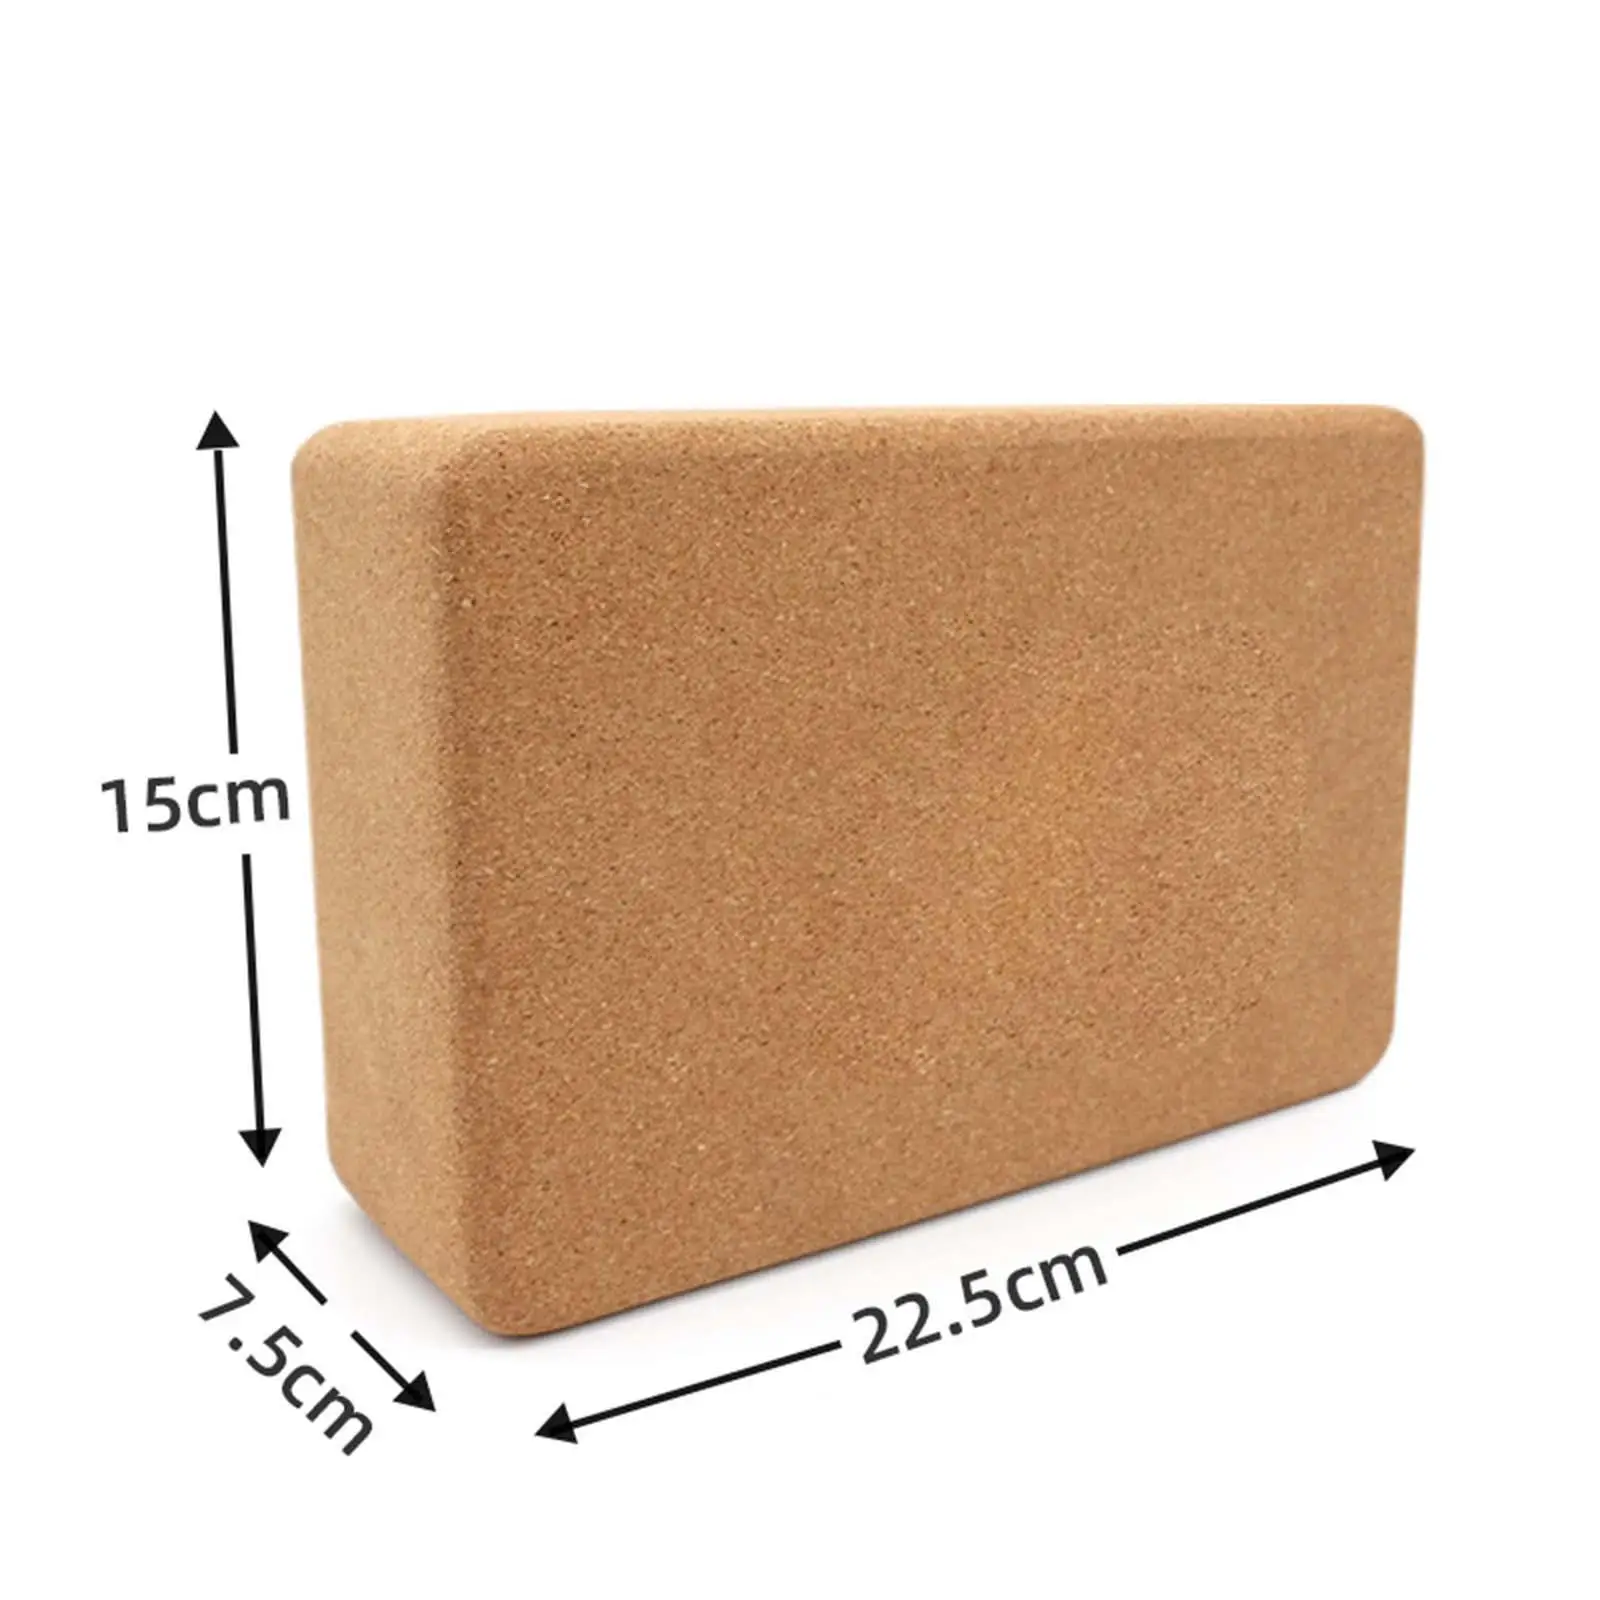 Cork Yoga Block Single Block Body Building High Density Non Slip Supportive Soft for Stretching Fitness Workout Indoor Sports